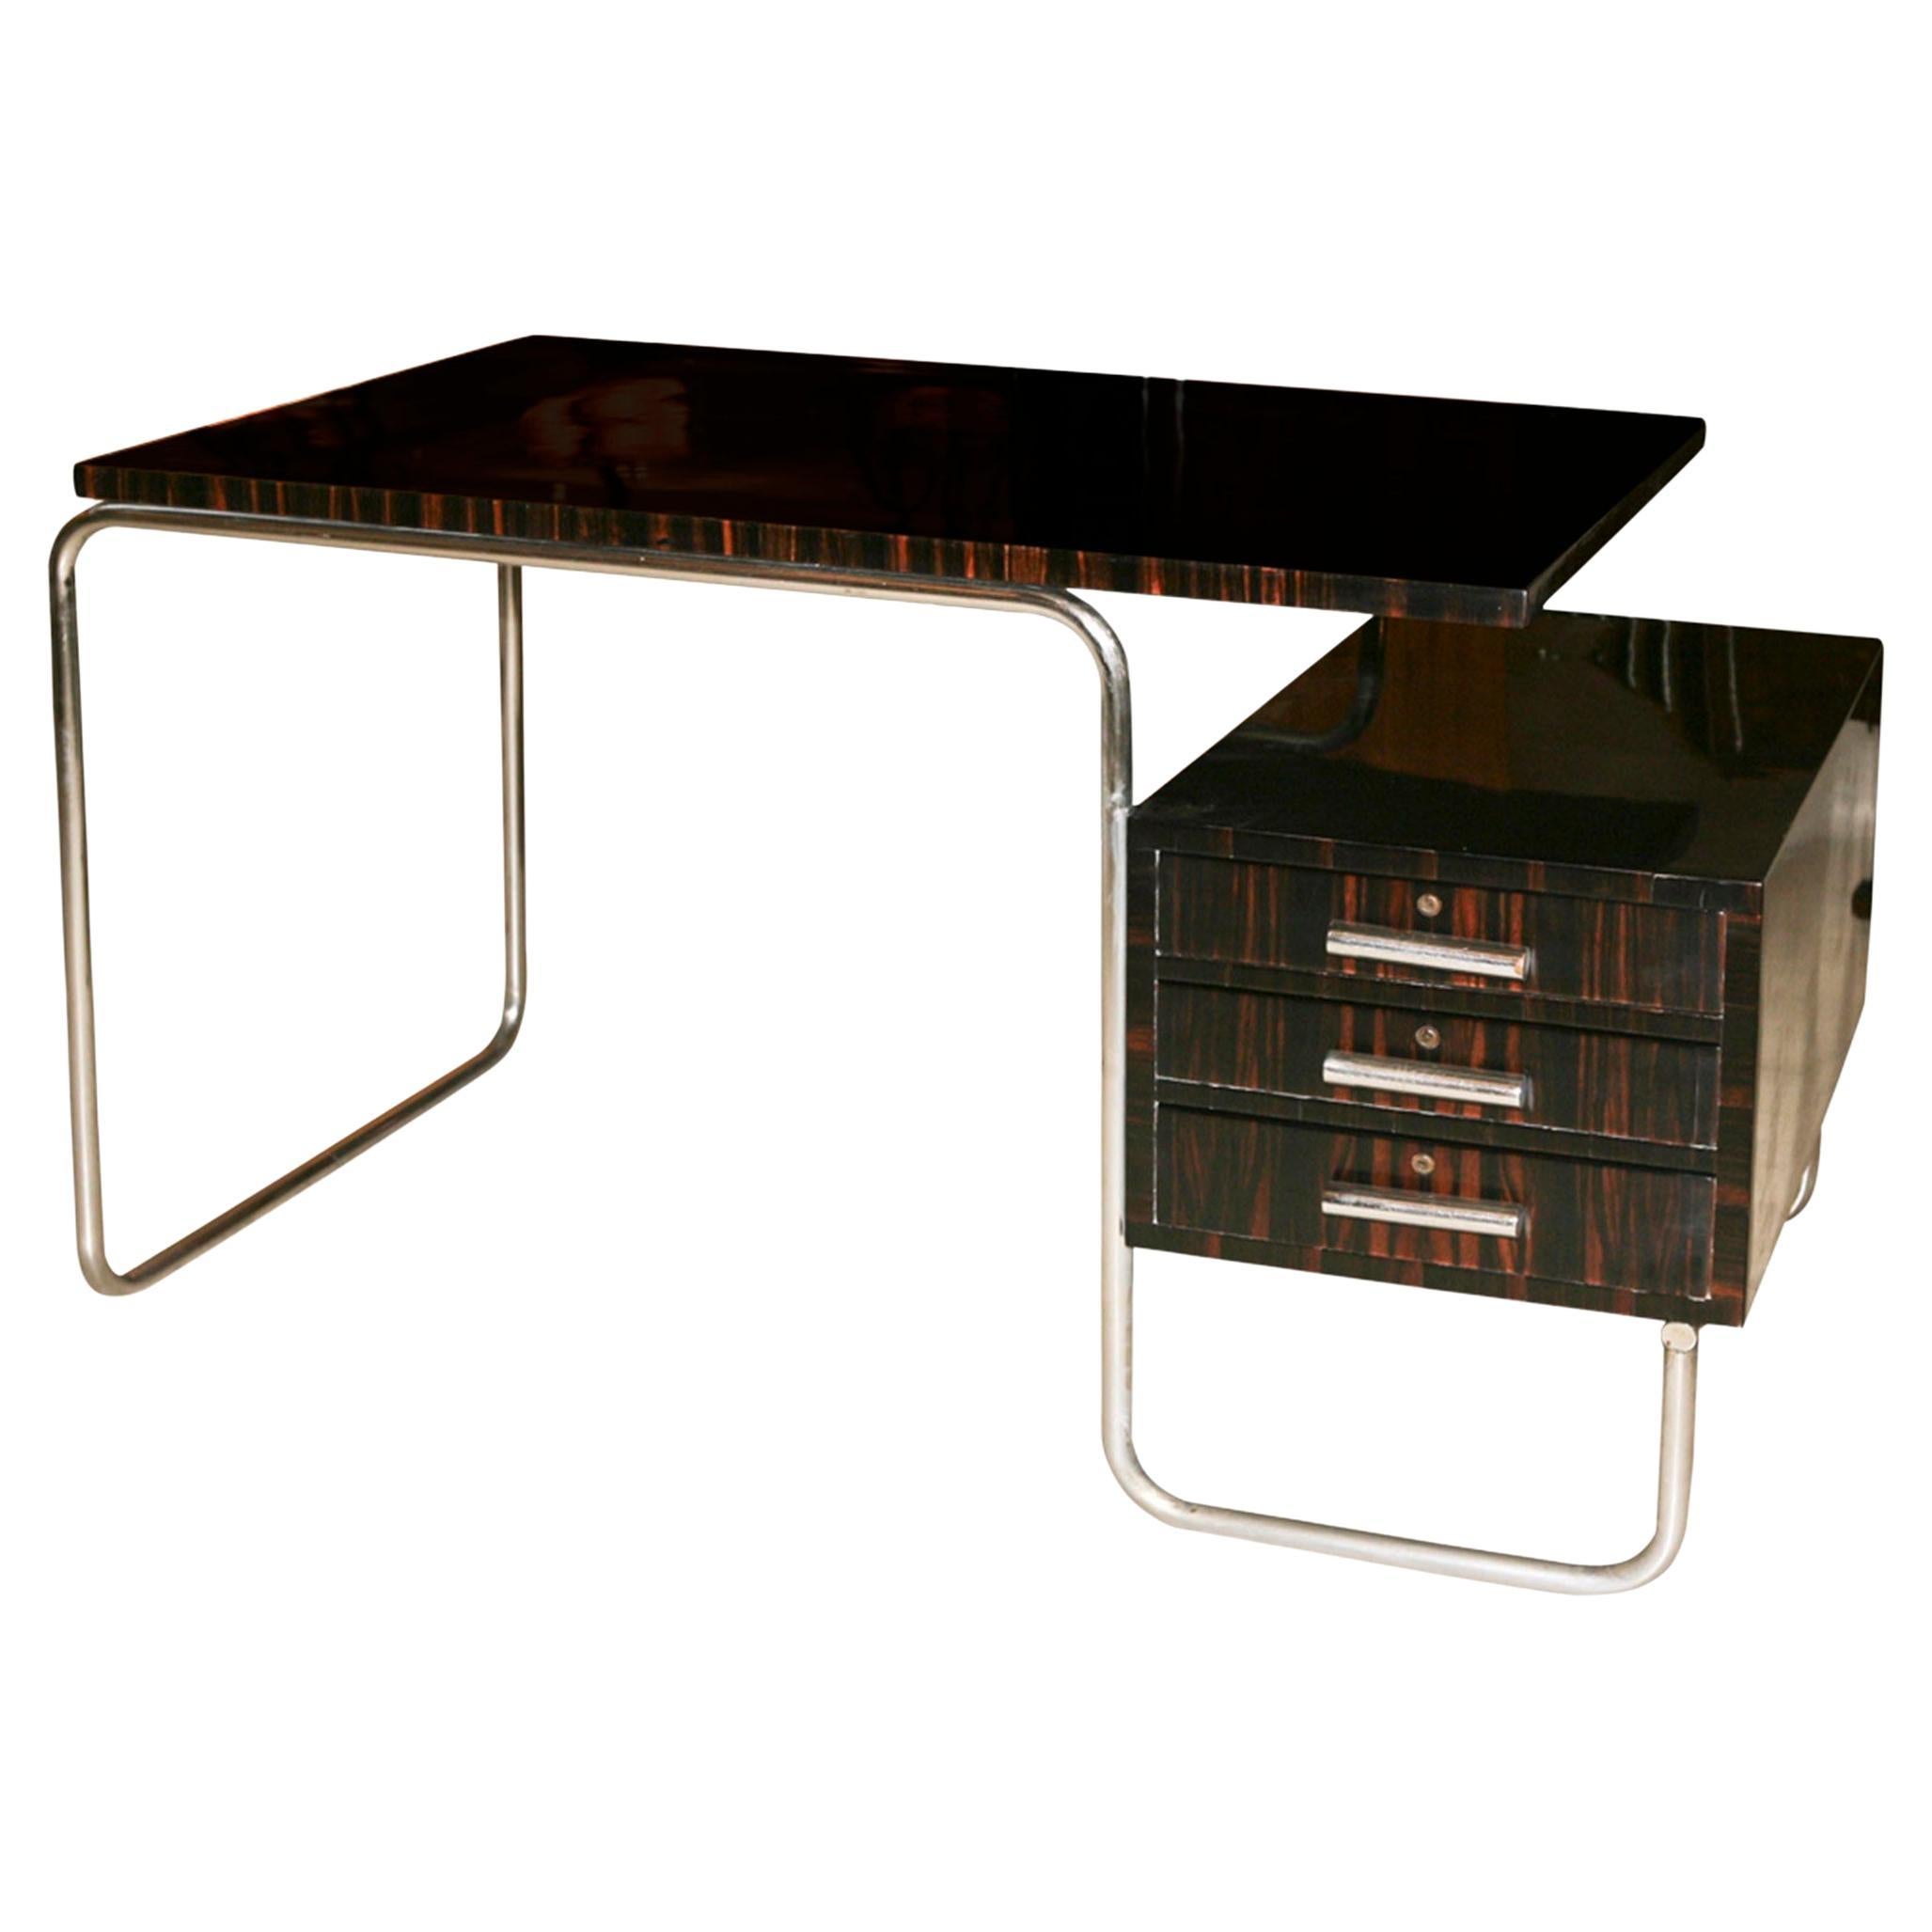 Desk Style Art Deco in Wood and chrome, 1940, Made in Germany